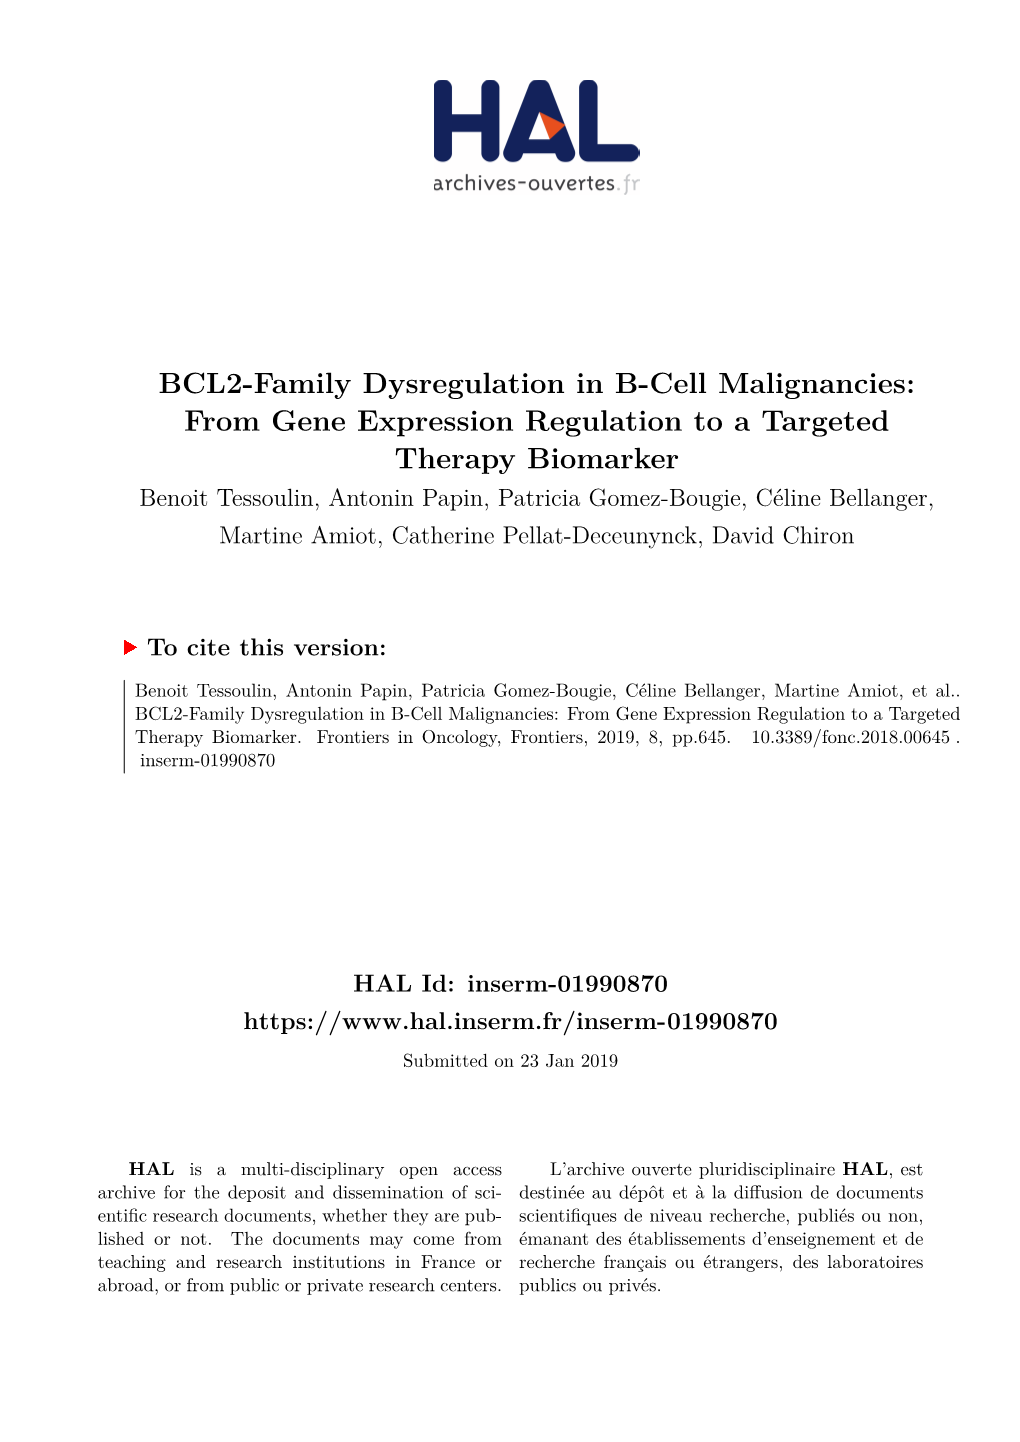 BCL2-Family Dysregulation in B-Cell Malignancies